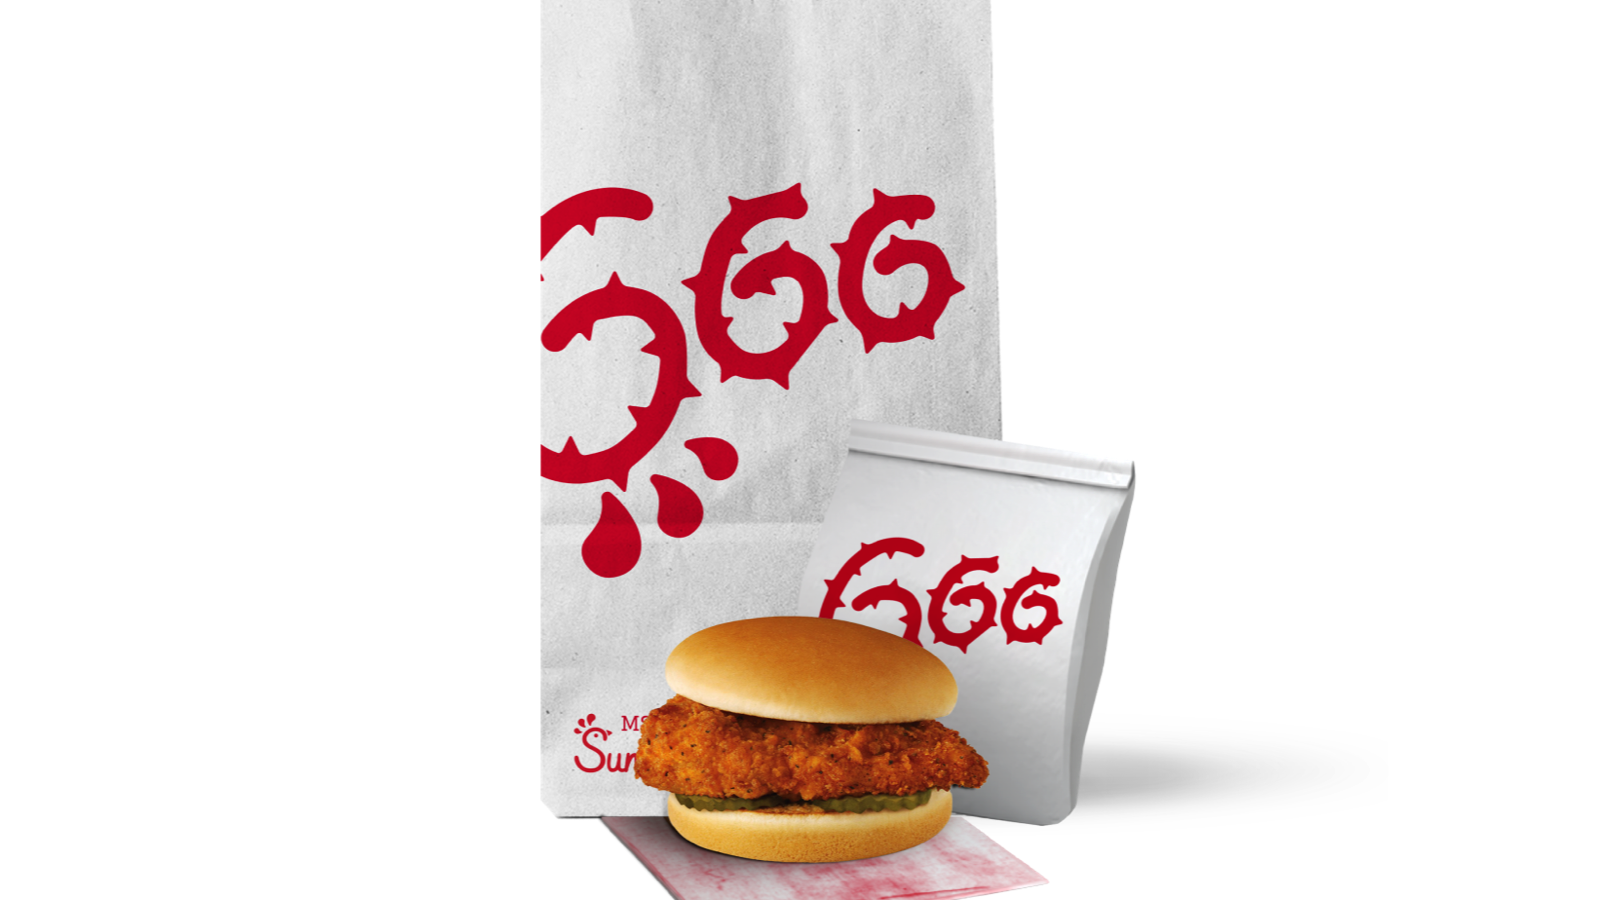 The Chick-fil-A classic sandwiches and their MSCHF-redesigned packaging.